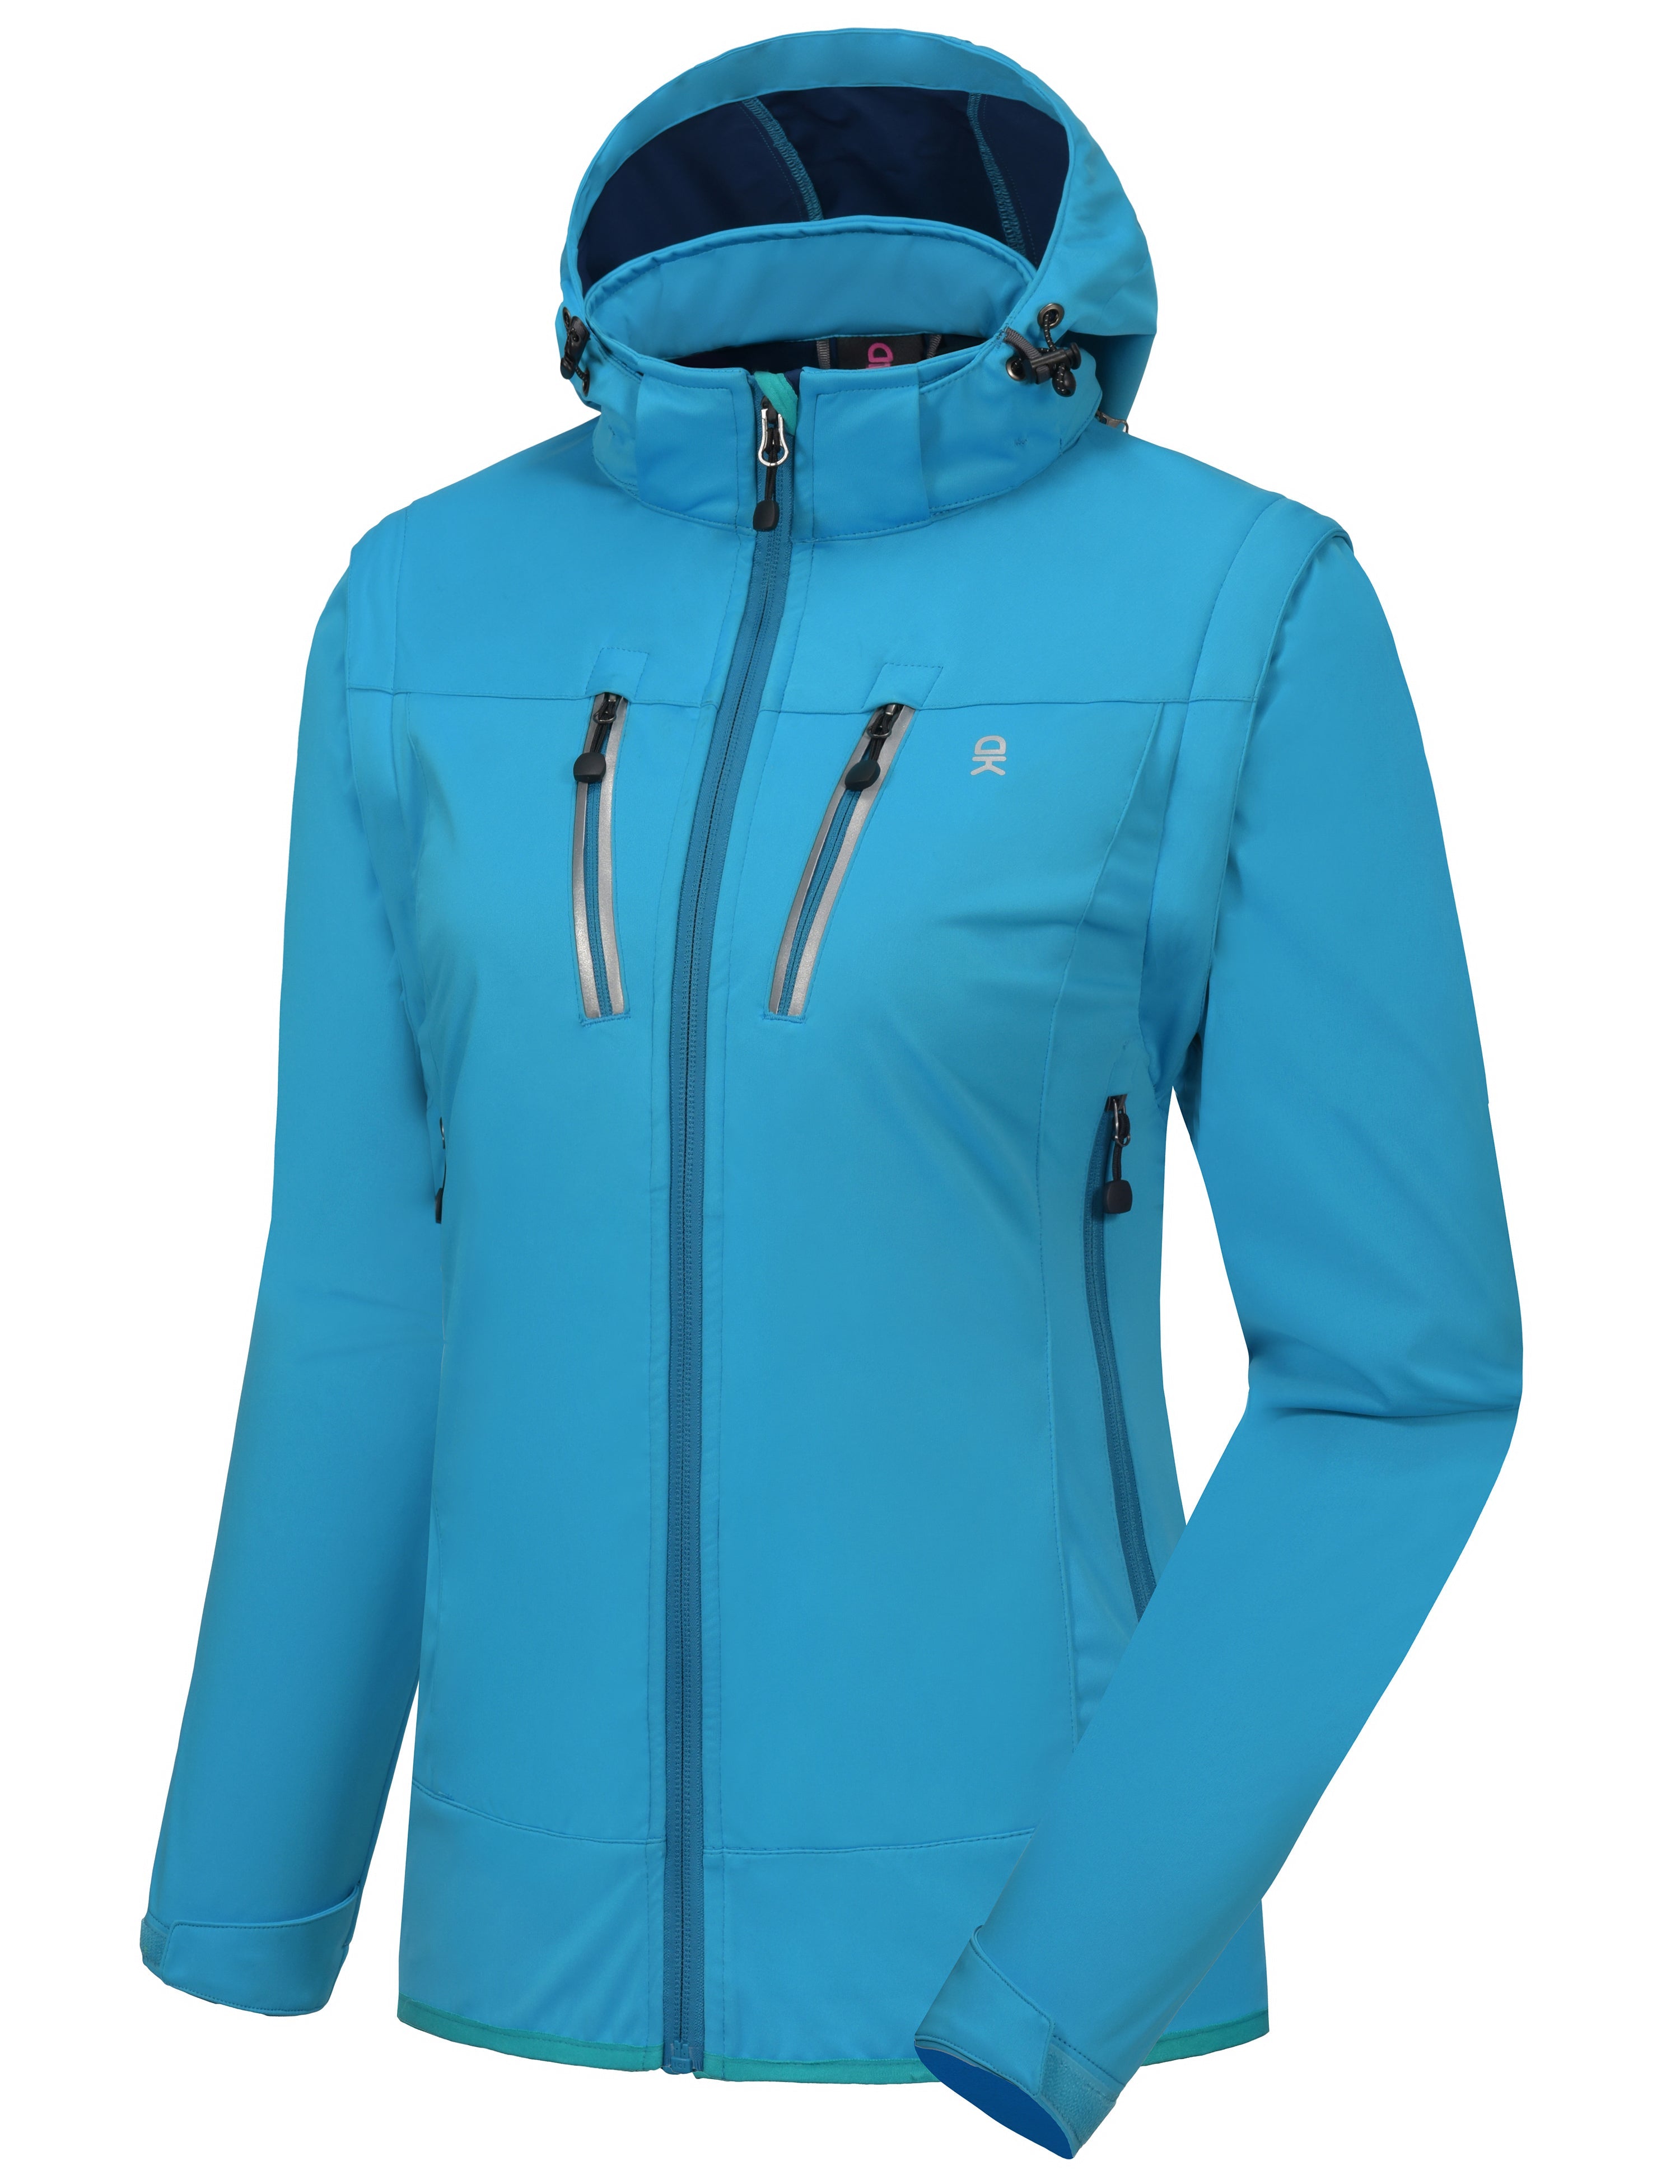 Women's Lightweight Softshell Hiking Jacket with Detachable Sleeves an –  Little Donkey Andy